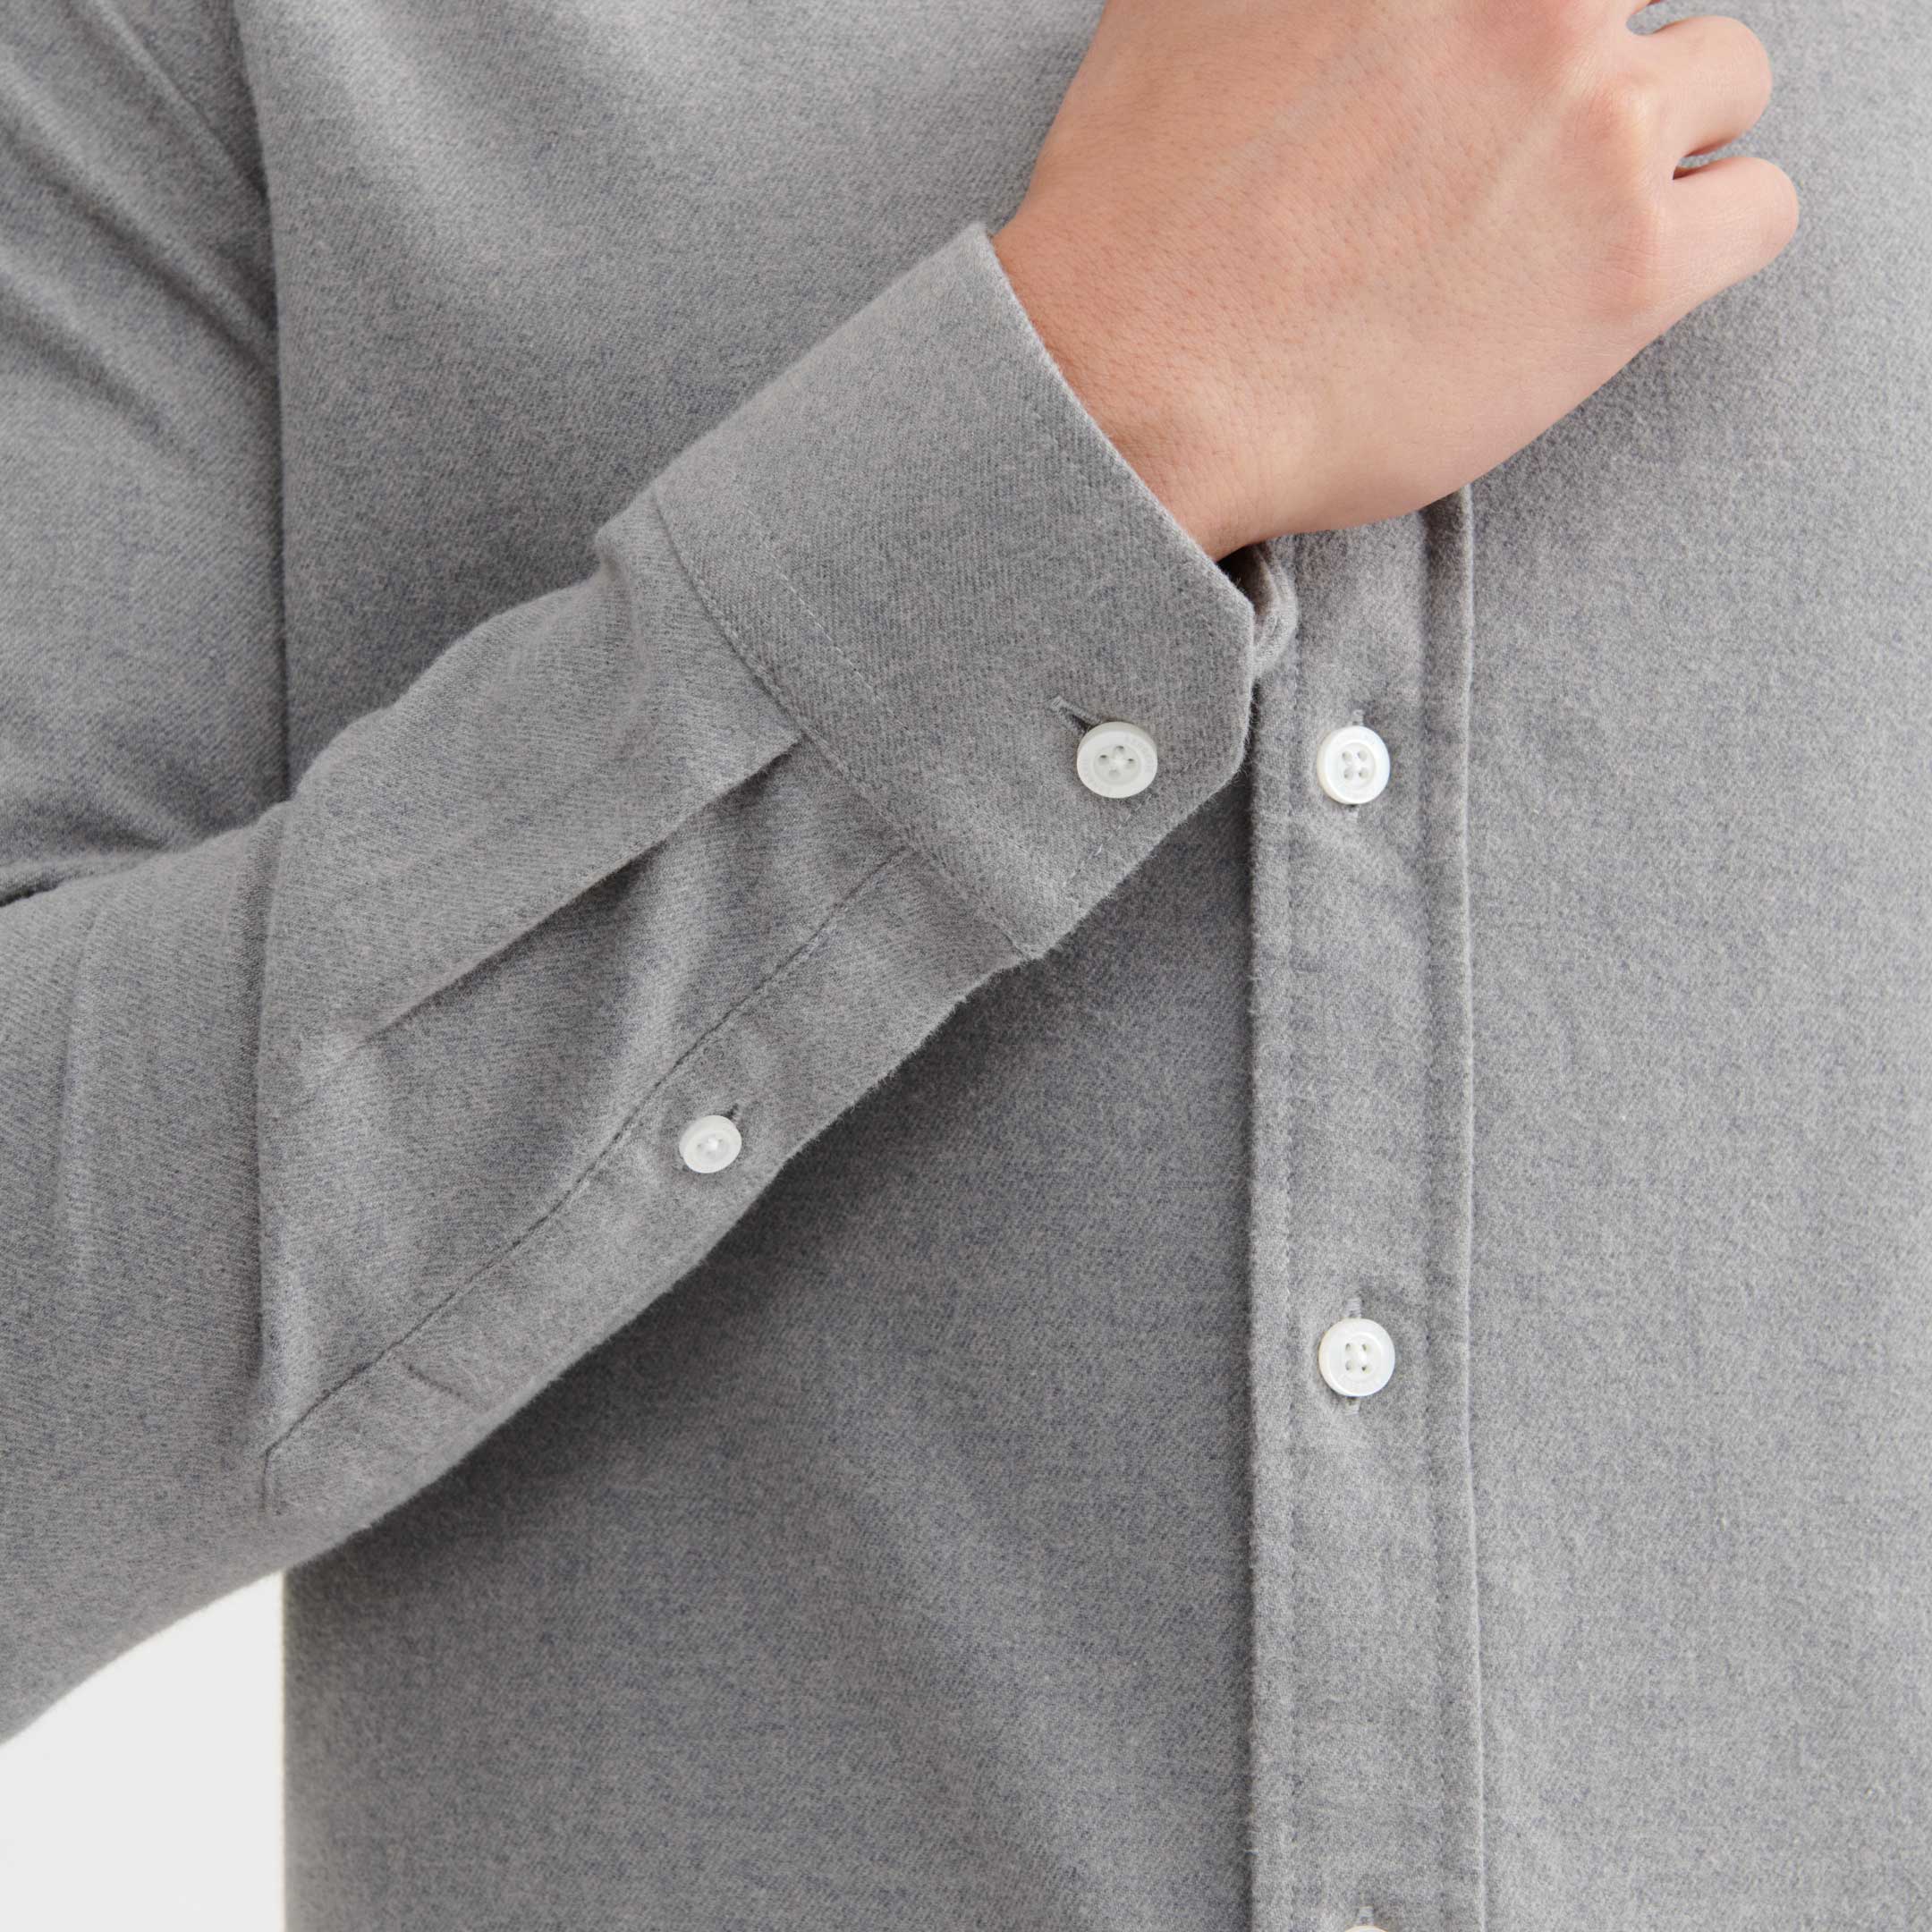 Buy The Ash Grey Classic Shirt For Men's Online